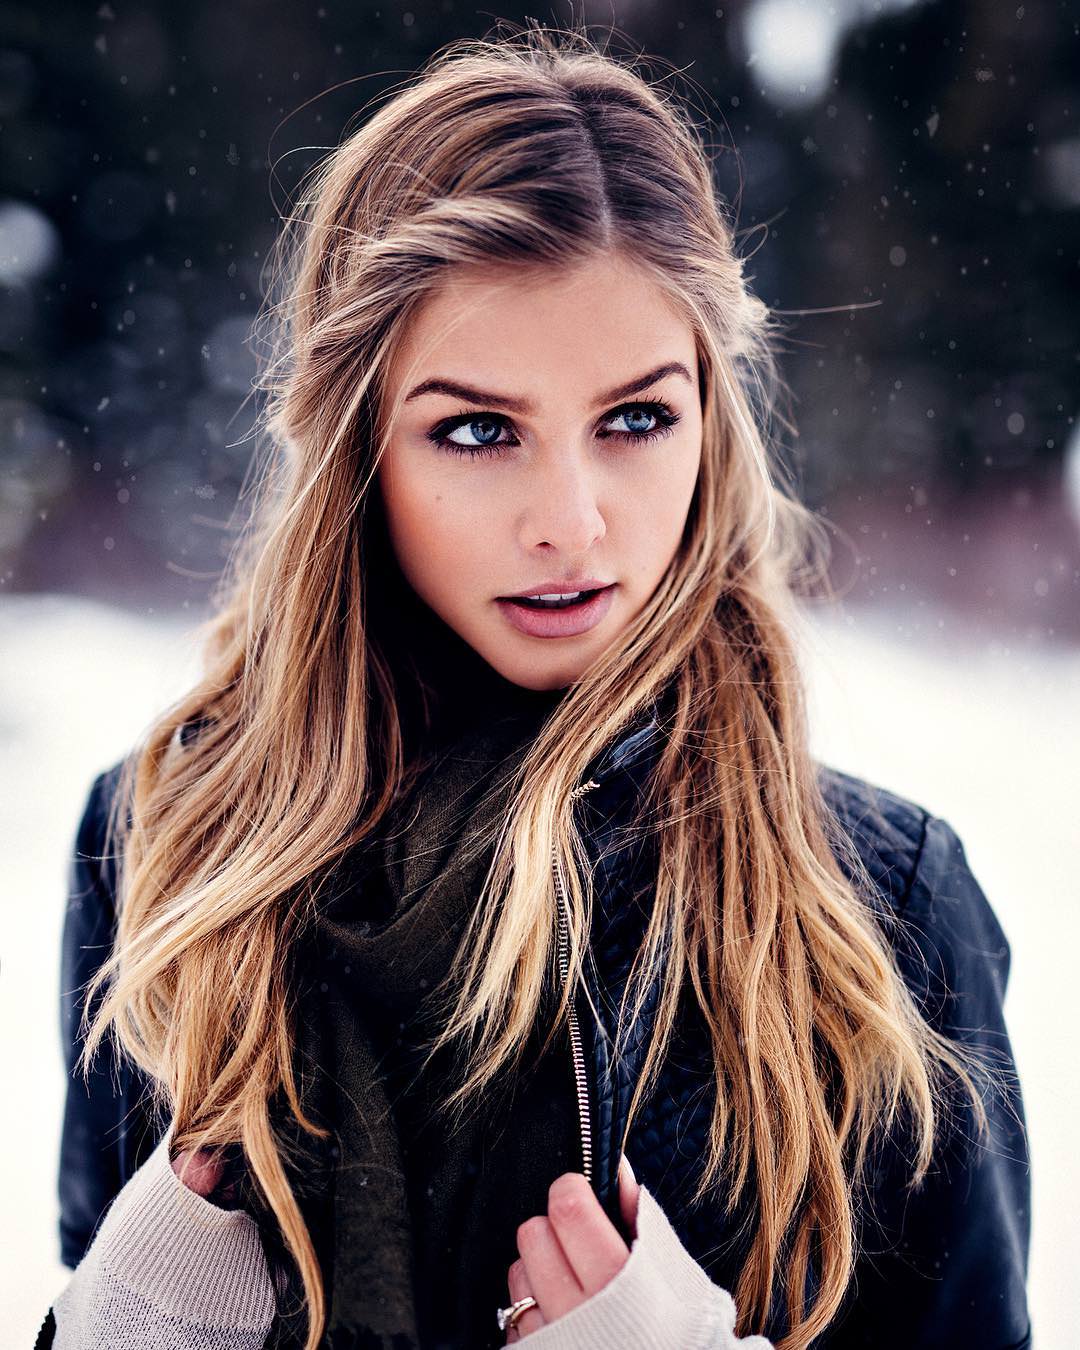 Marina Laswick Model Long Hair Outdoors Blonde Leather Jackets Snow Women Outdoors Cold Winter Dyed  1080x1350